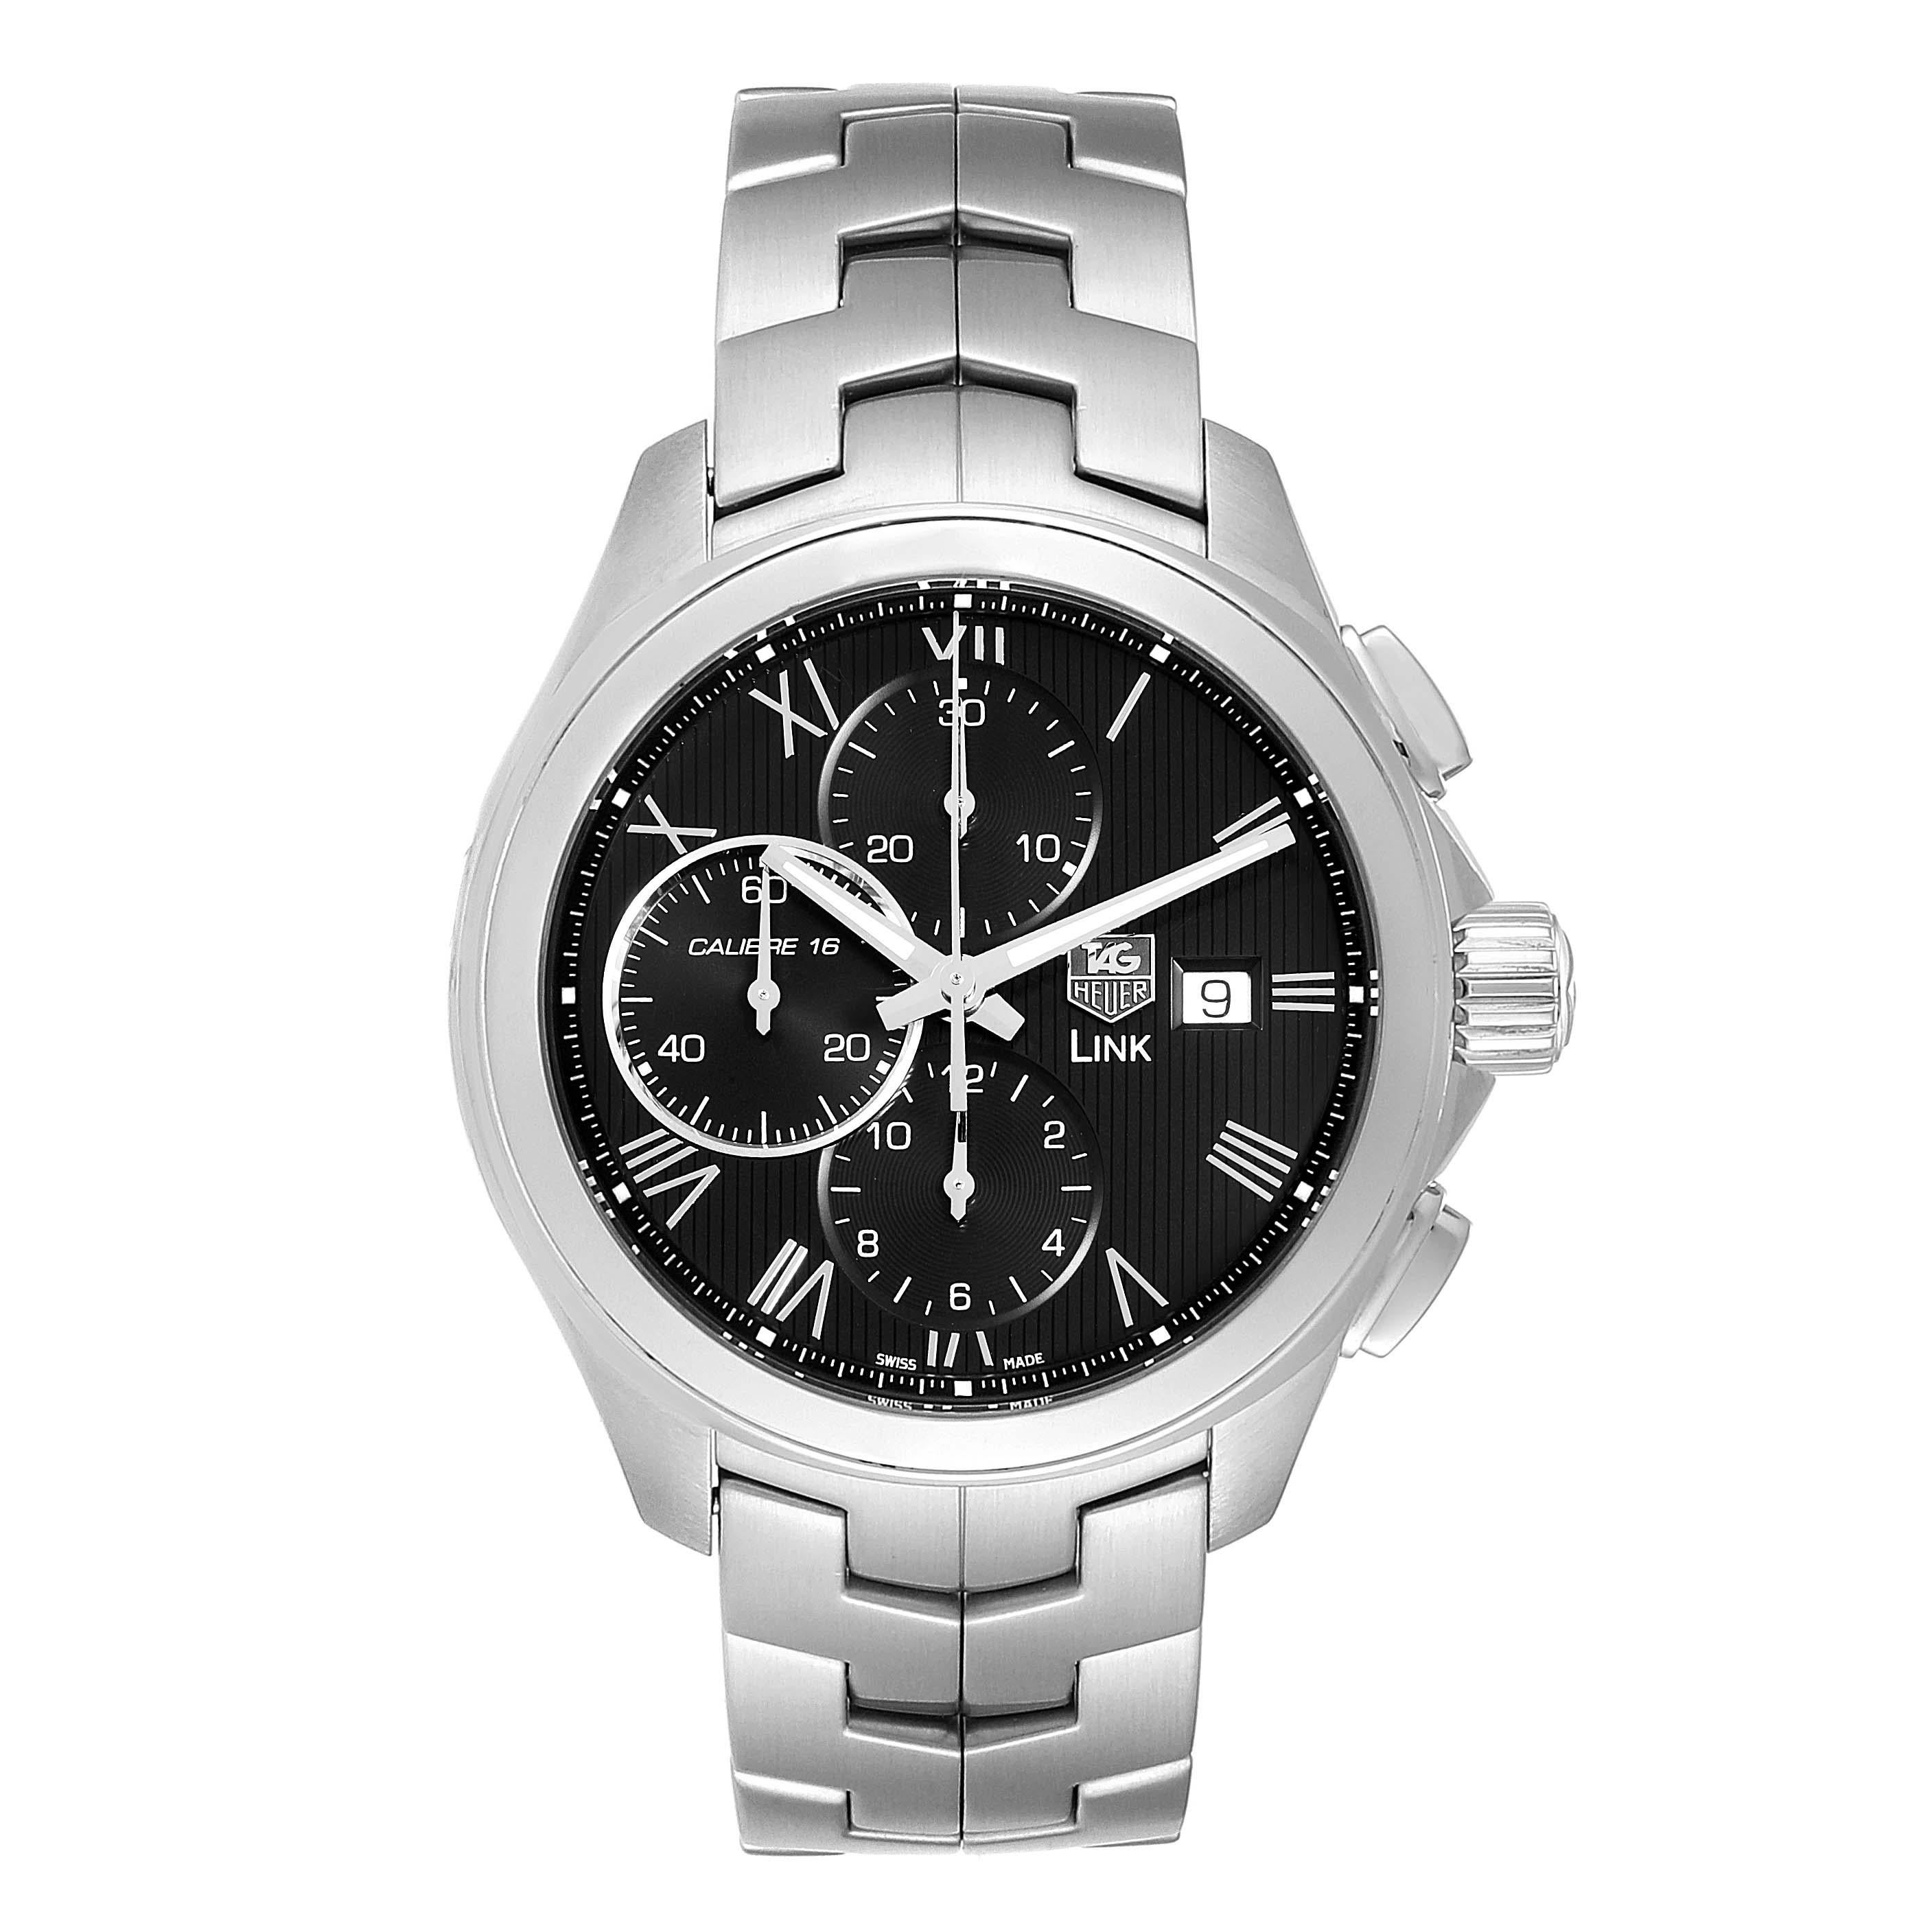 TAG Heuer Link Steel Black Dial Chronograph Mens Watch CAT2012 Box Card. Automatic self-winding chronograph movement. Stainless steel case 43.0 mm in diameter. Stainless steel tachimetric bezel . Scratch resistant sapphire crystal. Black dial with